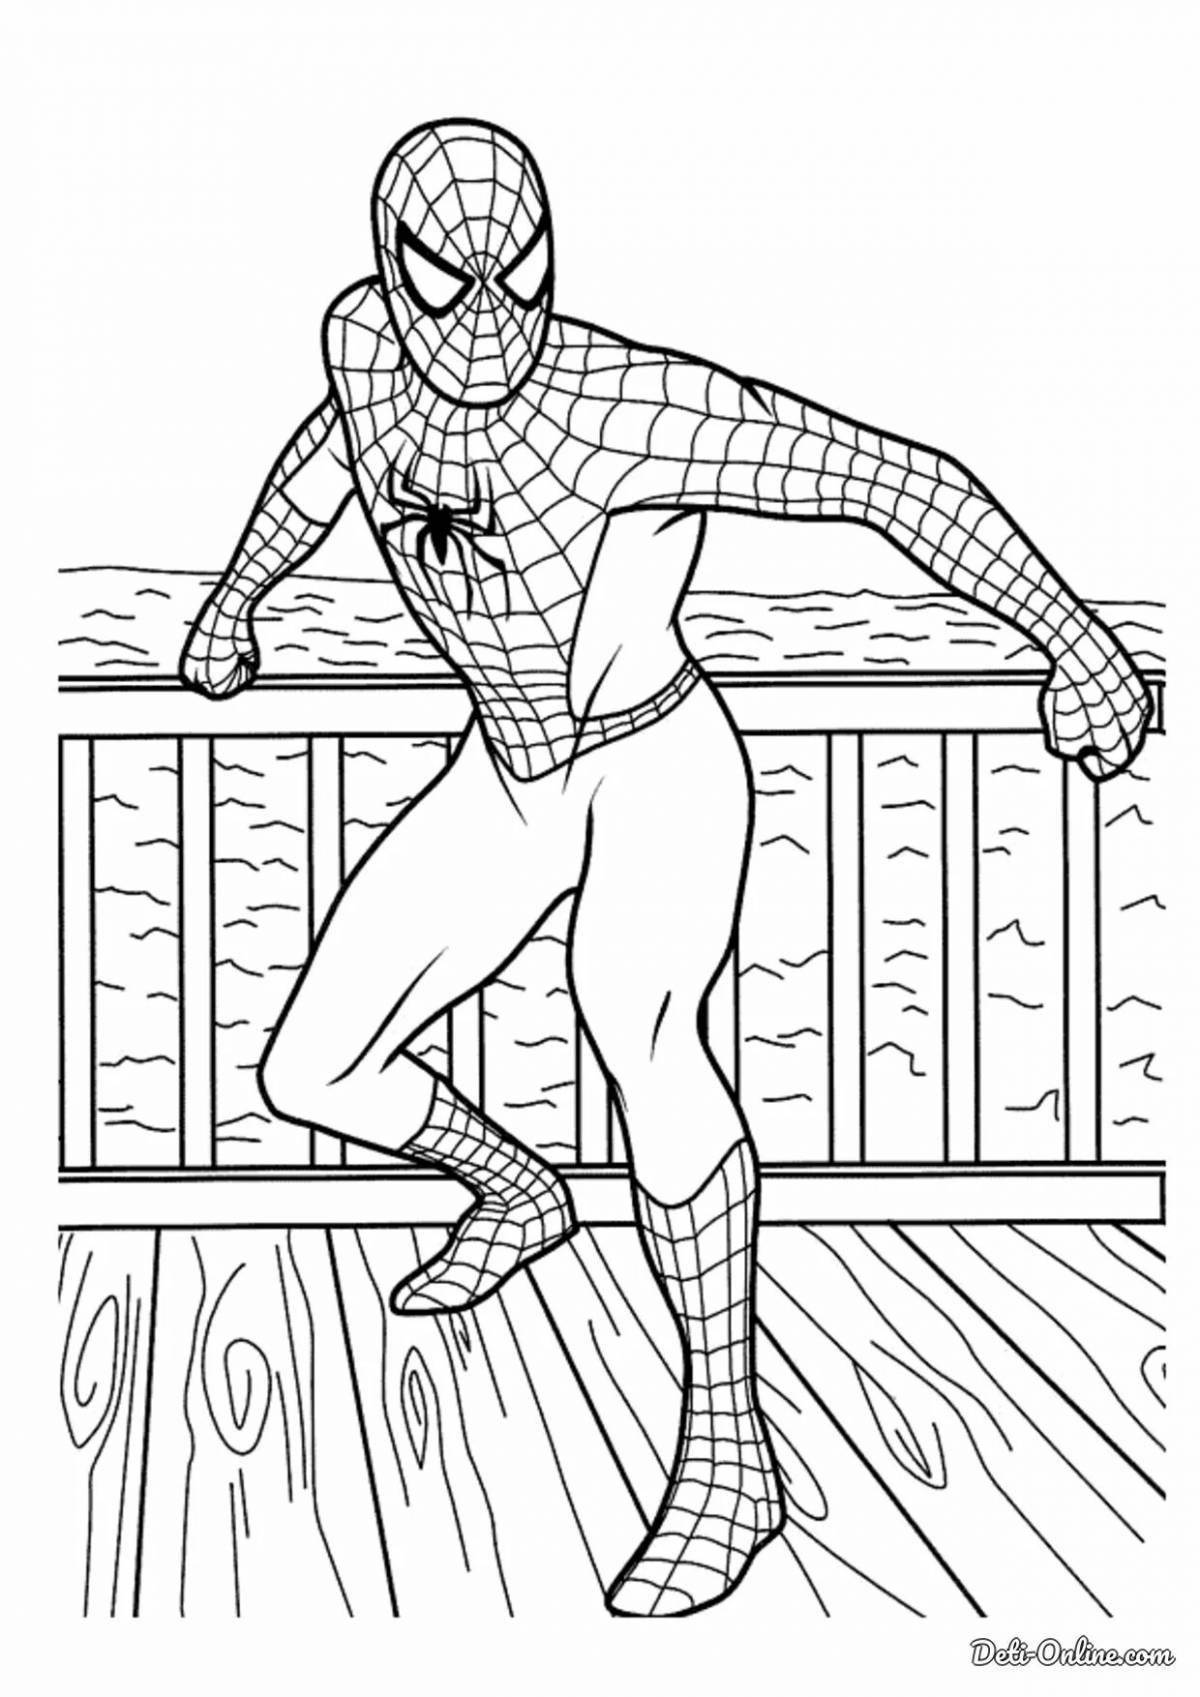 Radiant coloring page spider man photo